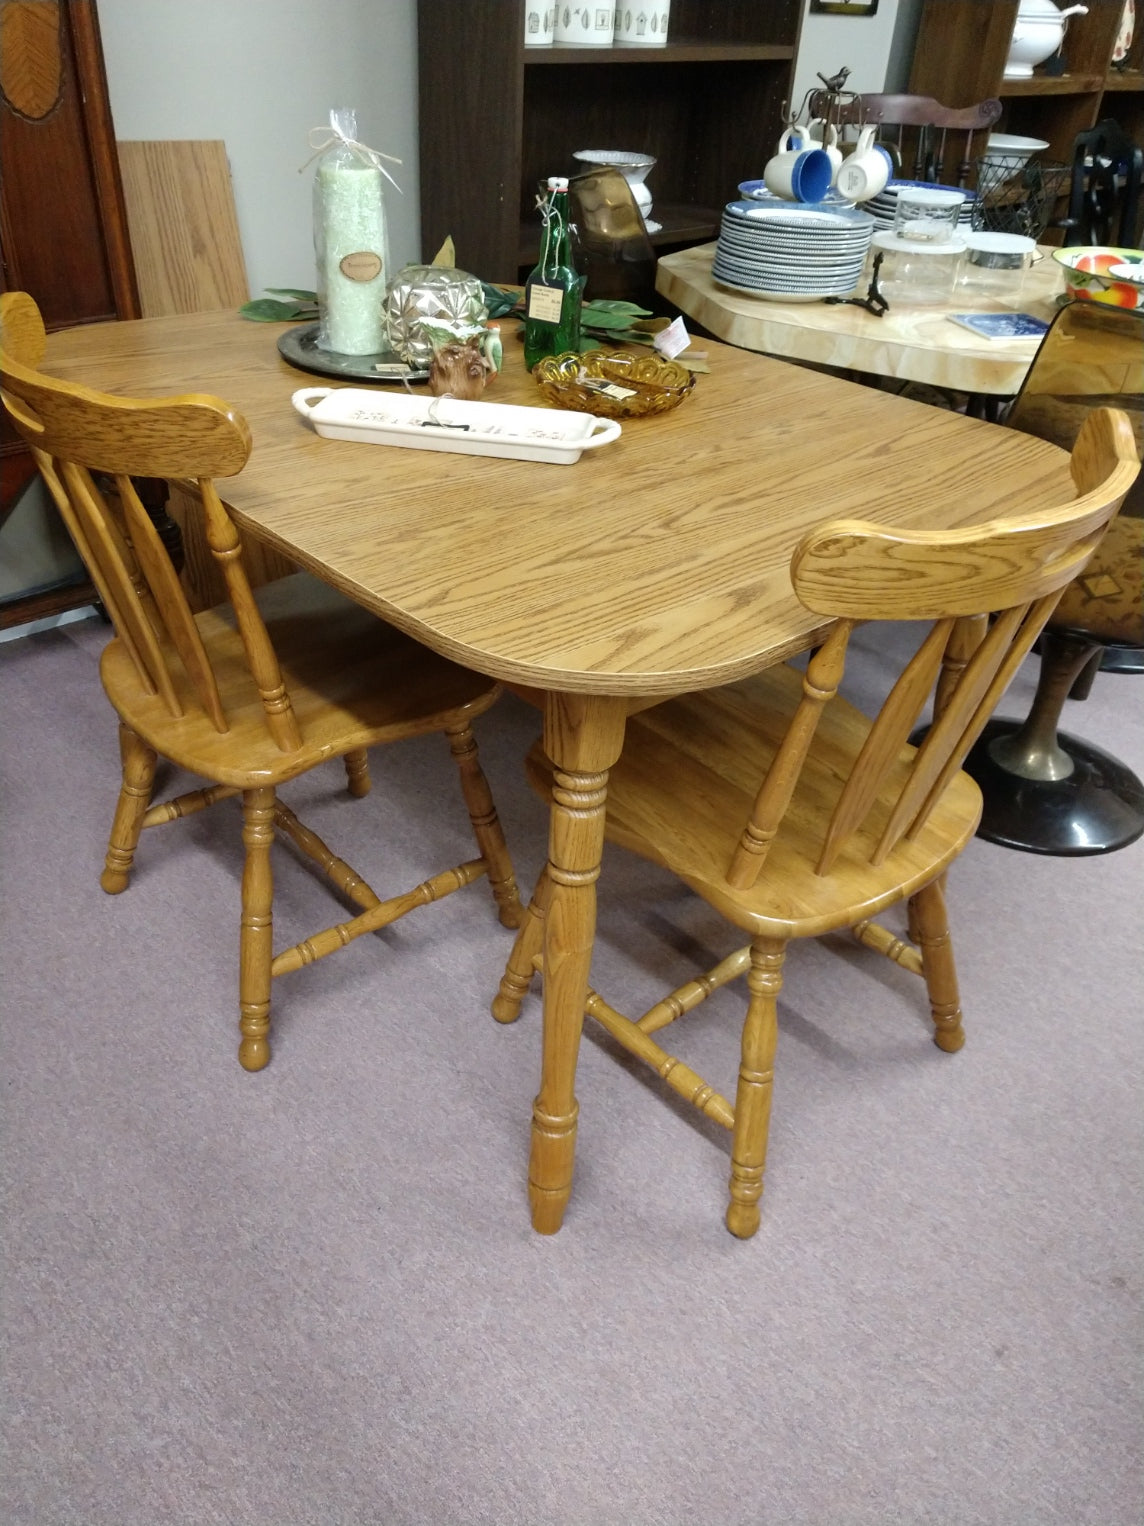 Laminate Top Table w/ 2 Chairs & Leaf